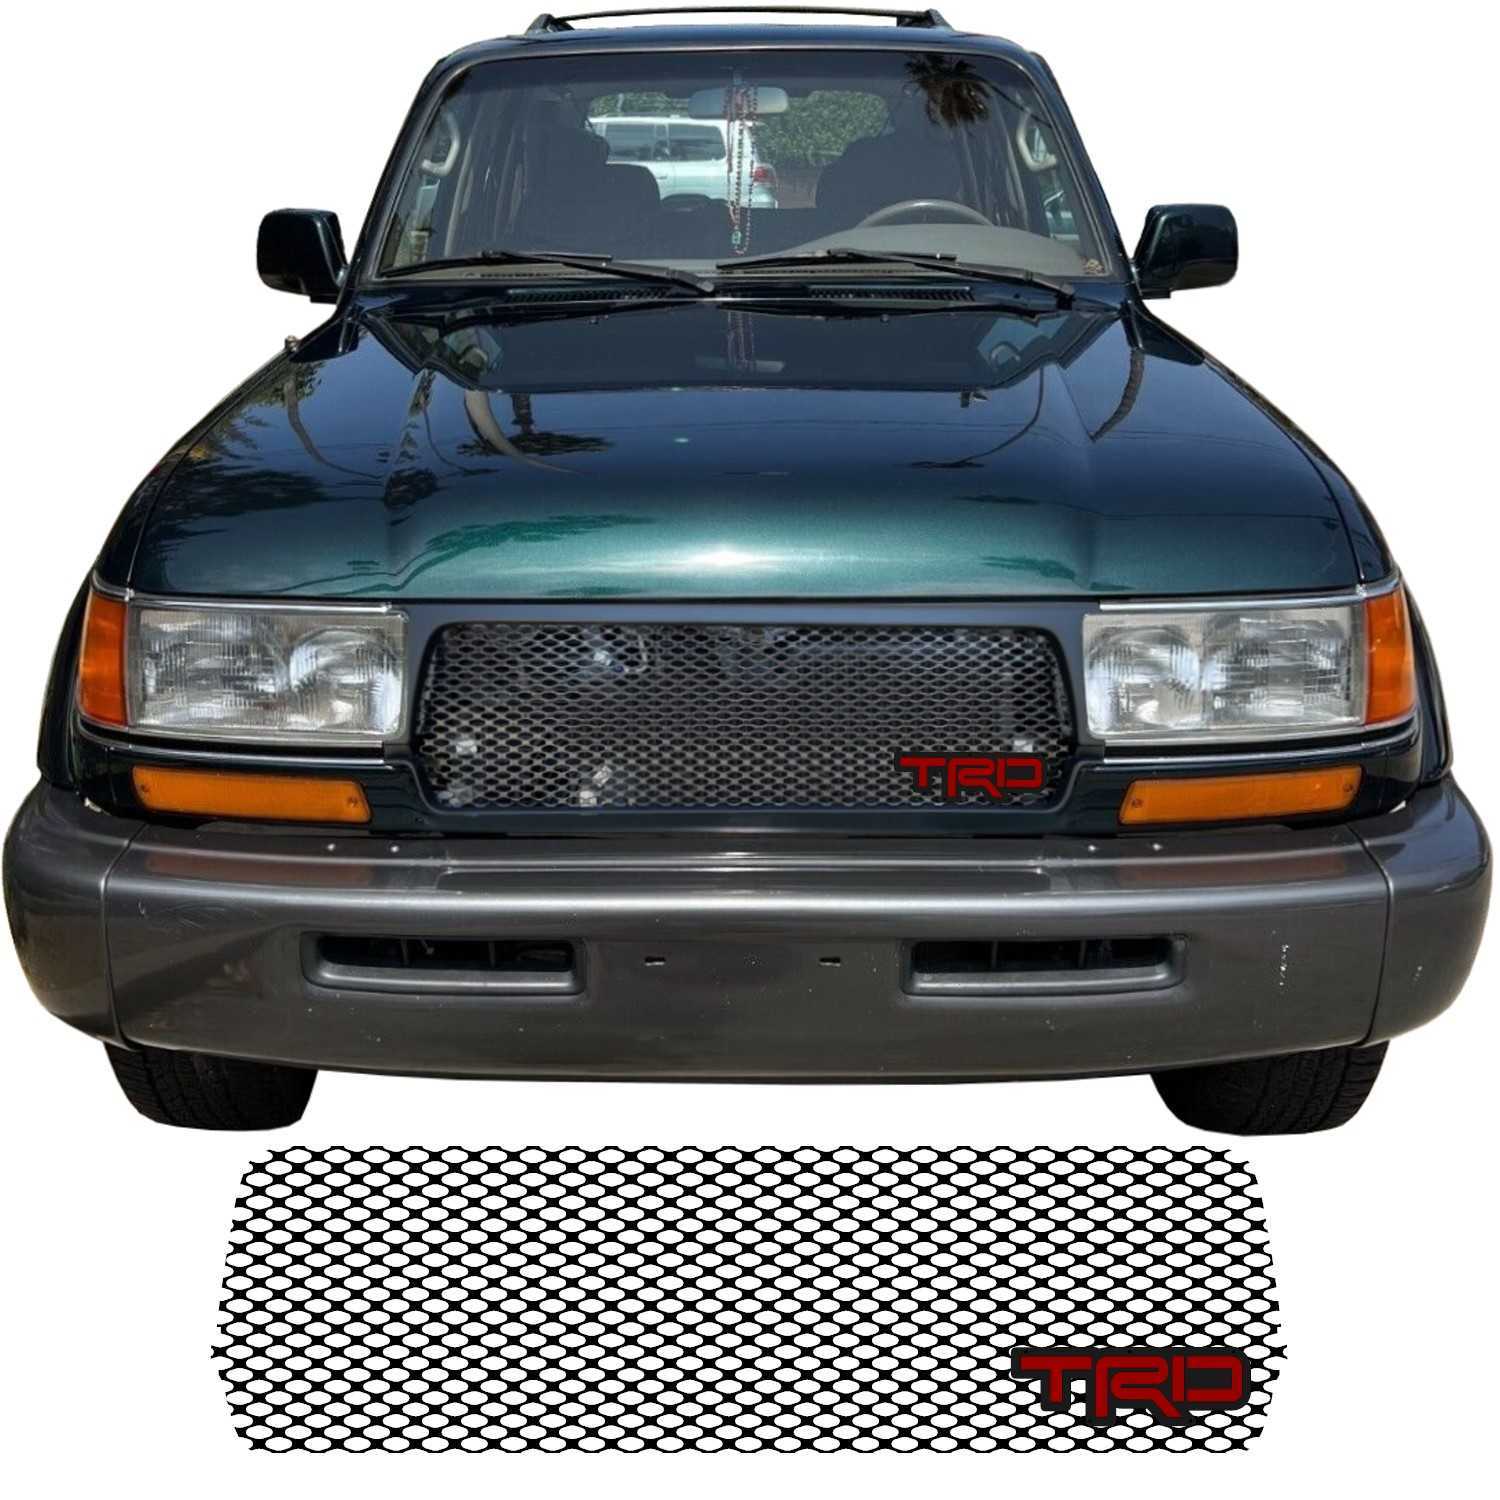 1991 - 1994 Toyota Land Cruiser Series 80 Grill Mesh and TRD Emblem #1